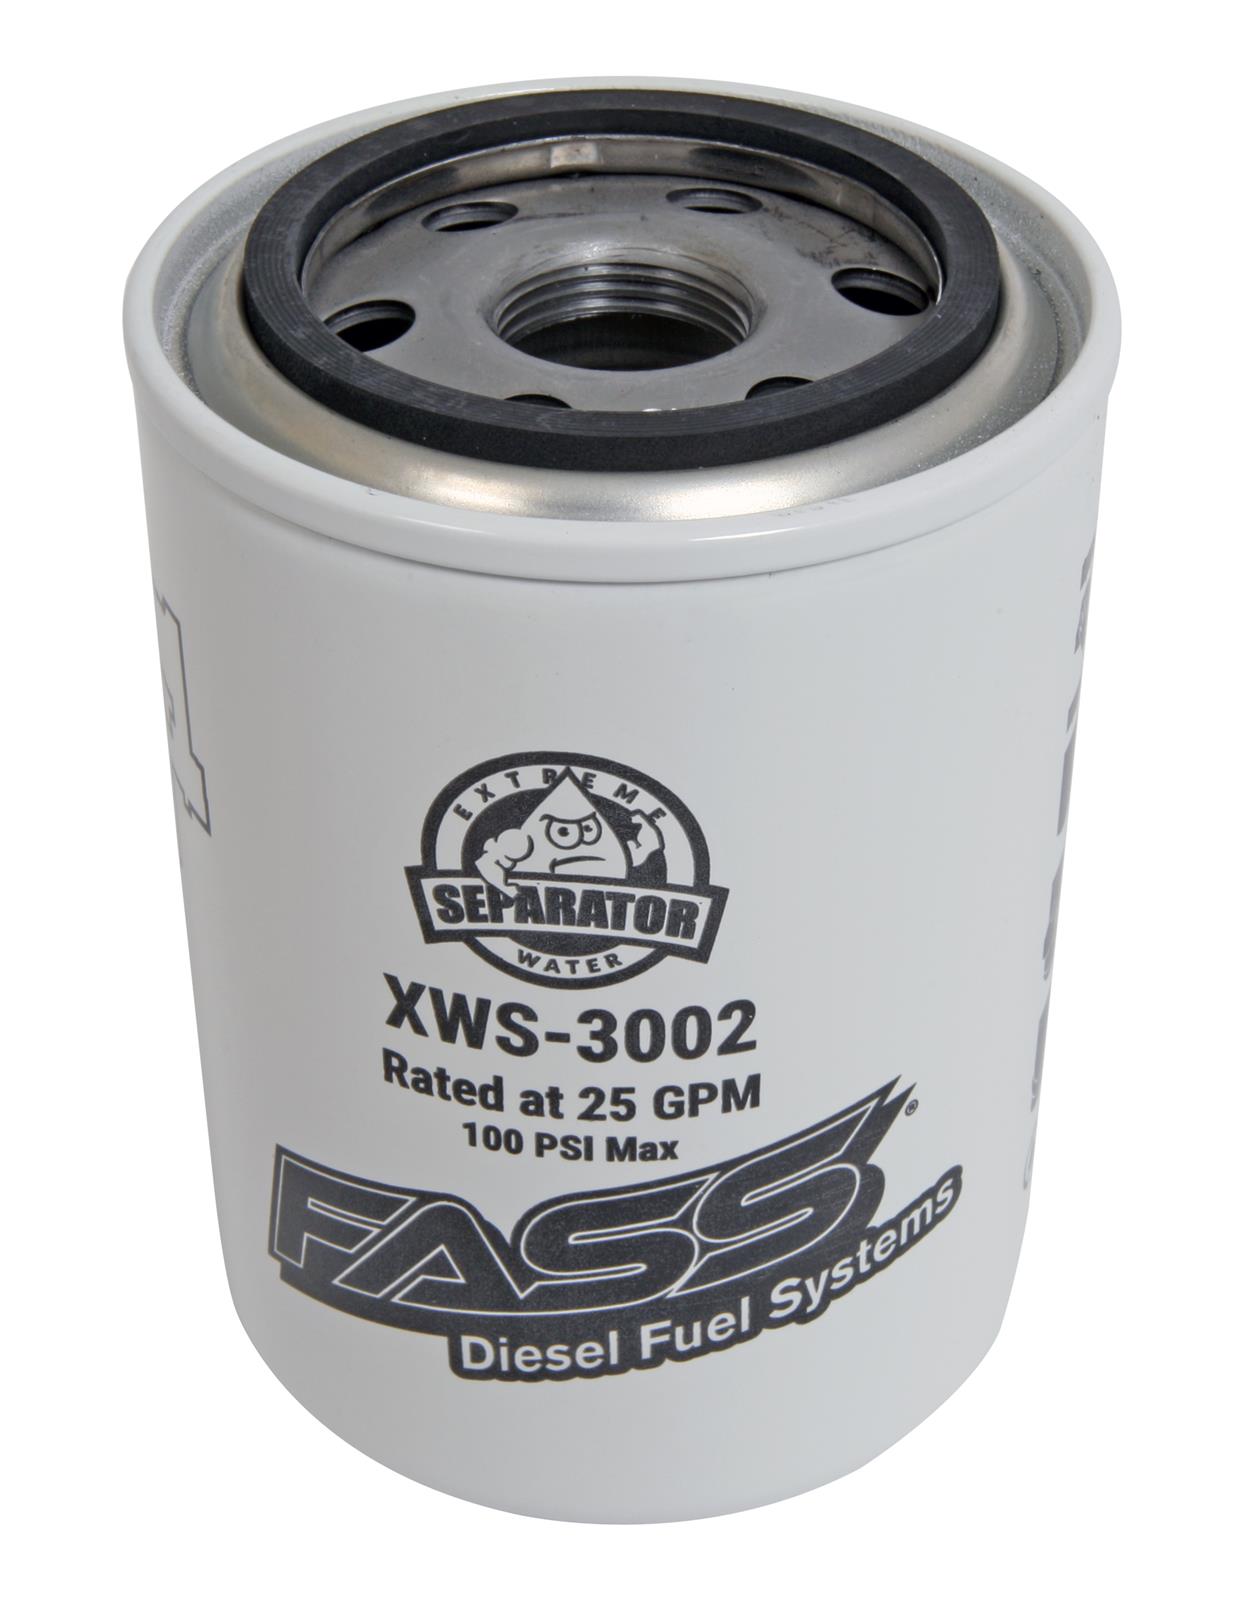 FASS Fuel Systems Replacement Fuel Filters XWS-3002